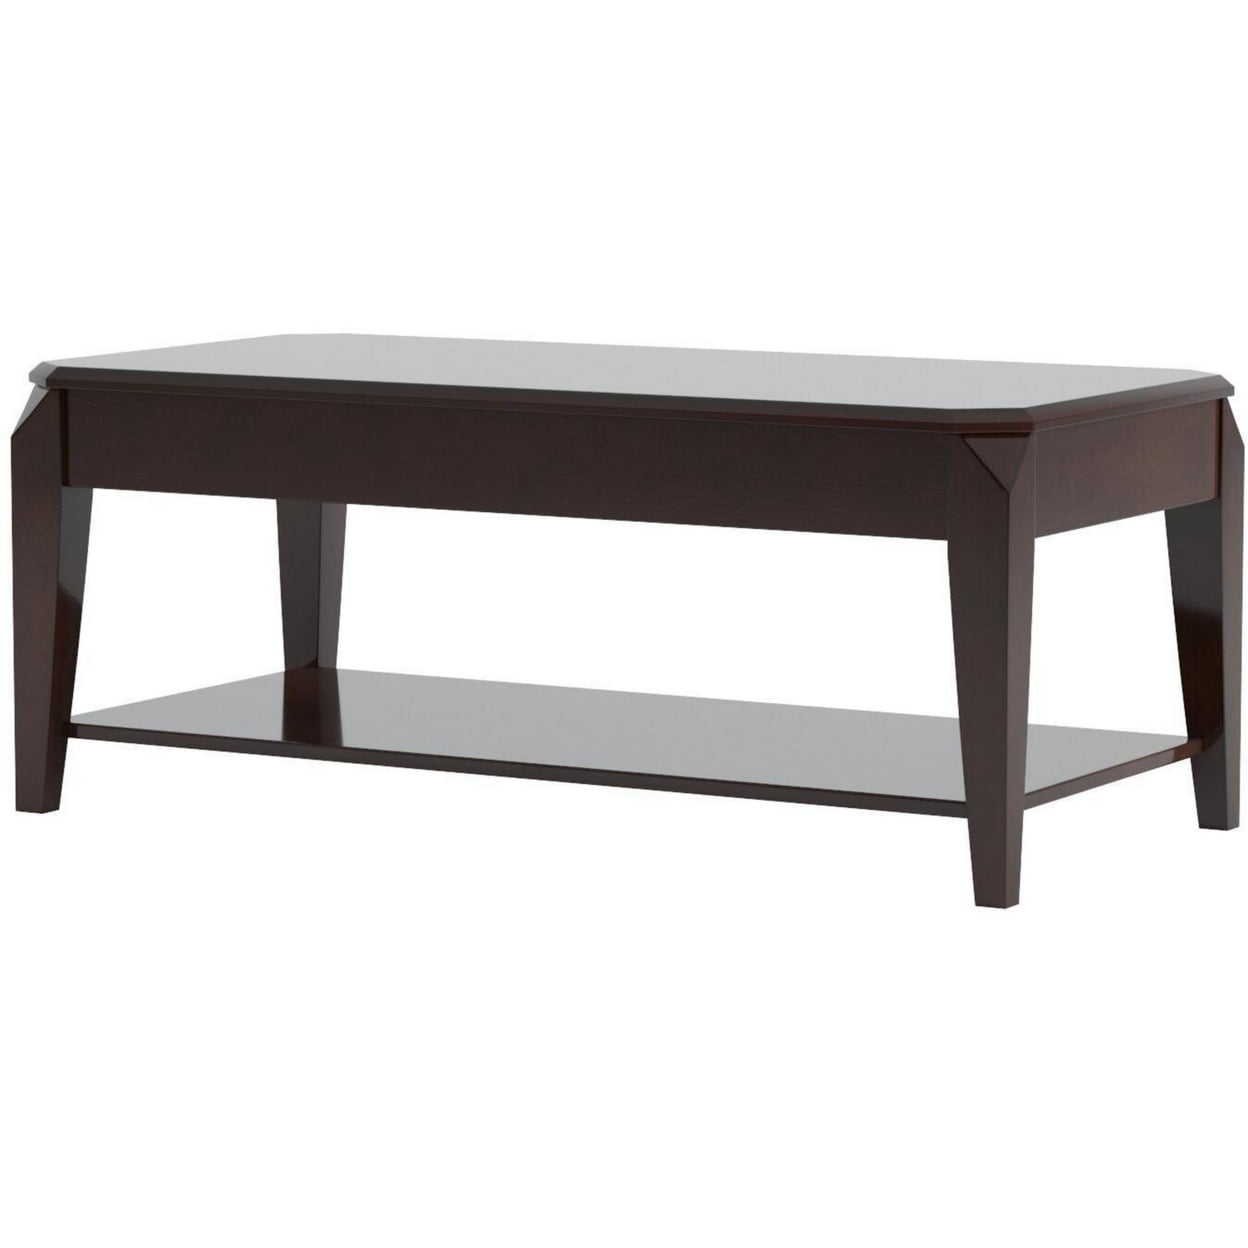 Picture of ACME 80660 Rectangular Docila Coffee Table with Lift Top - Walnut - 19 x 47 x 23 in.